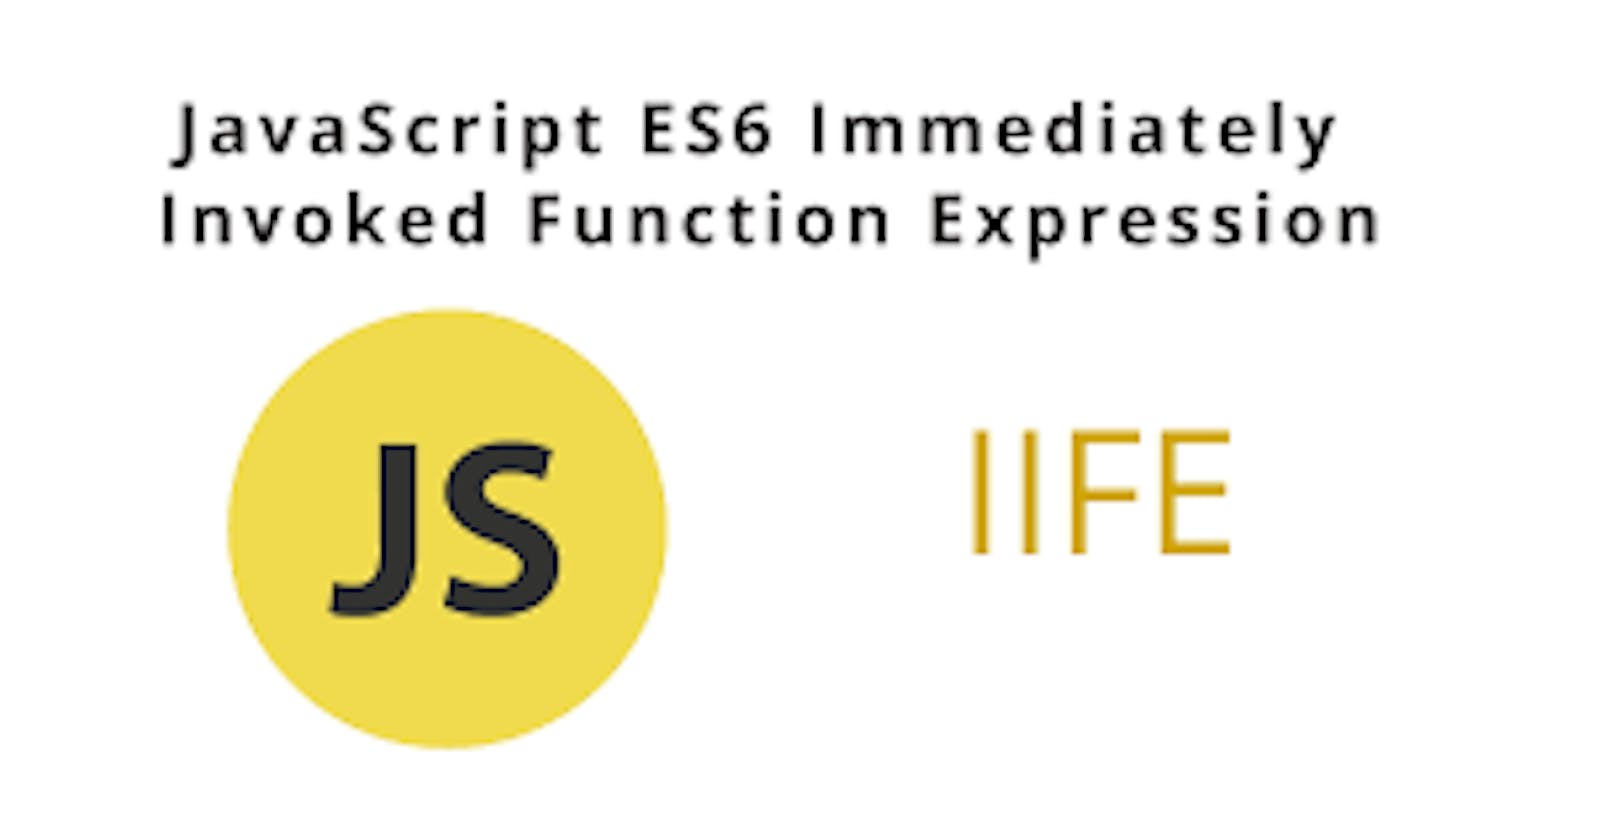 Immediately Invoked Function Expressions (IIFE)